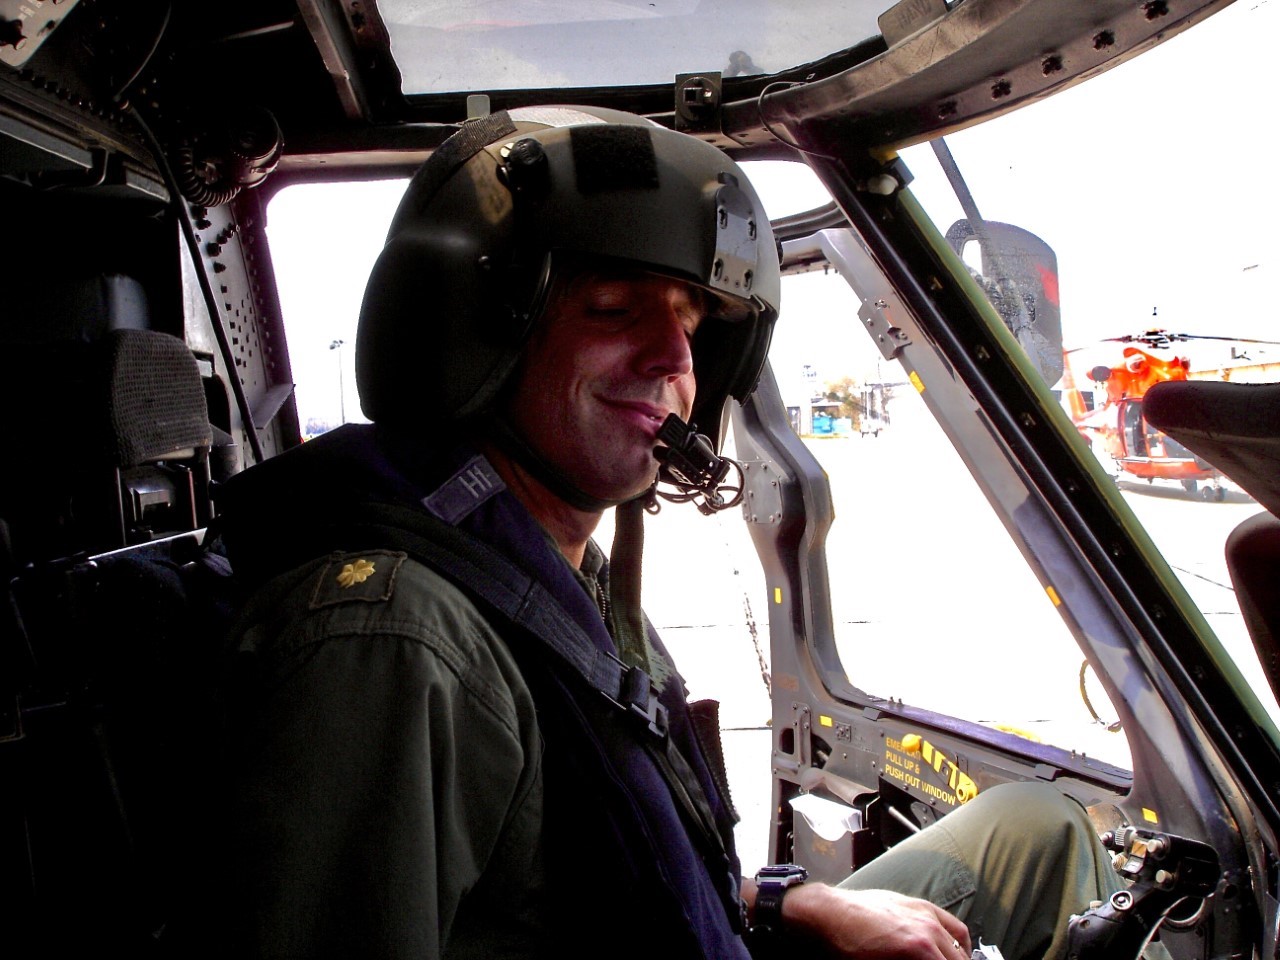 Cockpit photo of Lt. Cmdr. Jim O’Keefe at the controls of a Coast Guard HH-60J helicopter. (Photograph courtesy of James O’Keefe)